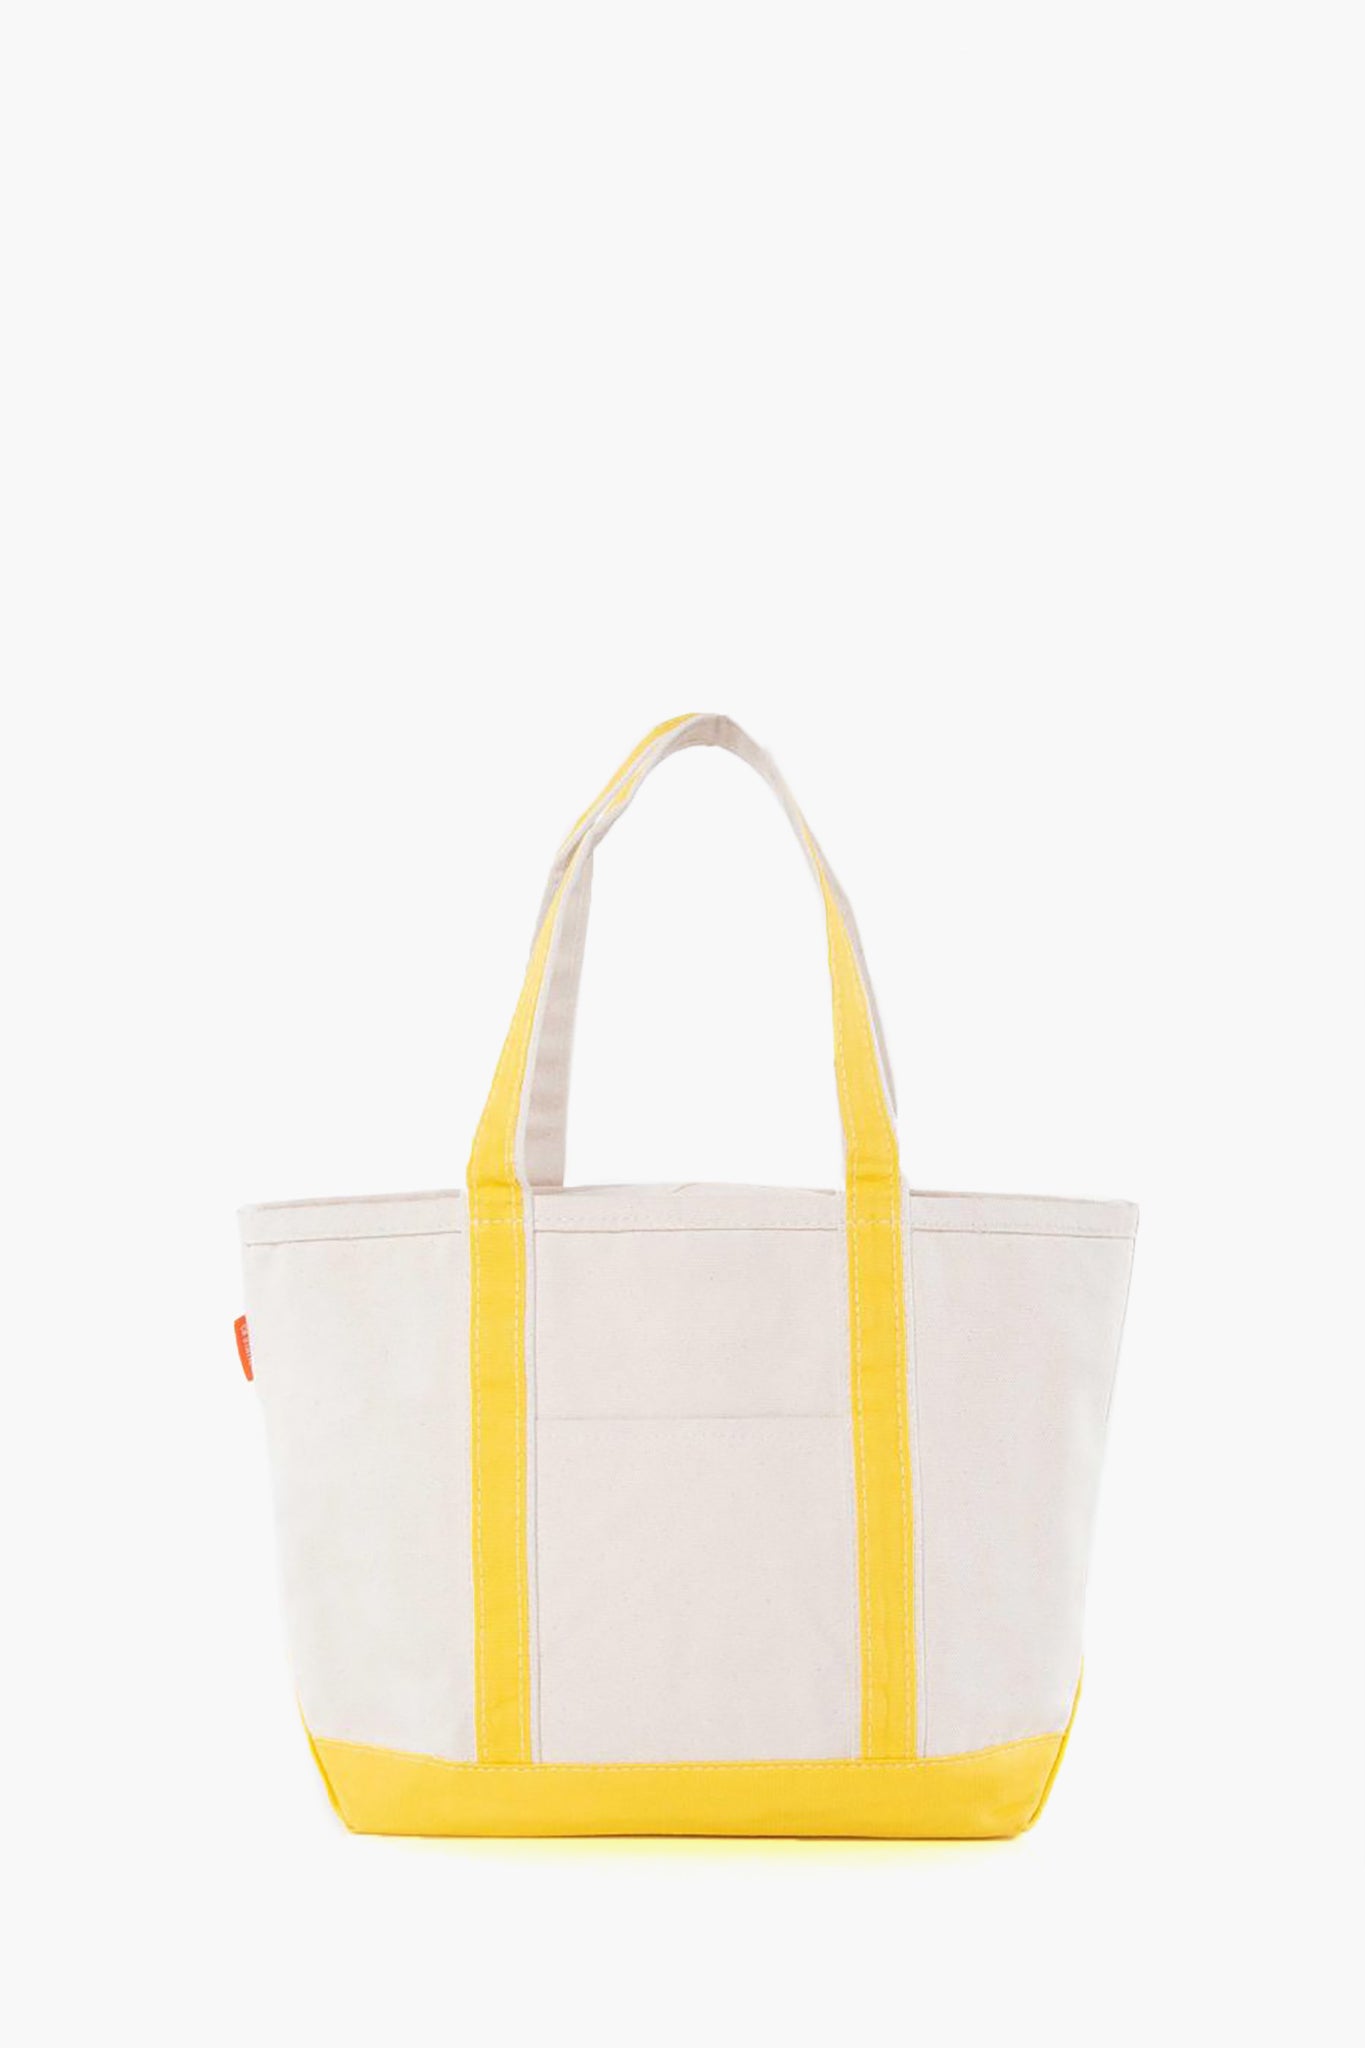 Bateau Weaved Tote by Clare V. for $15